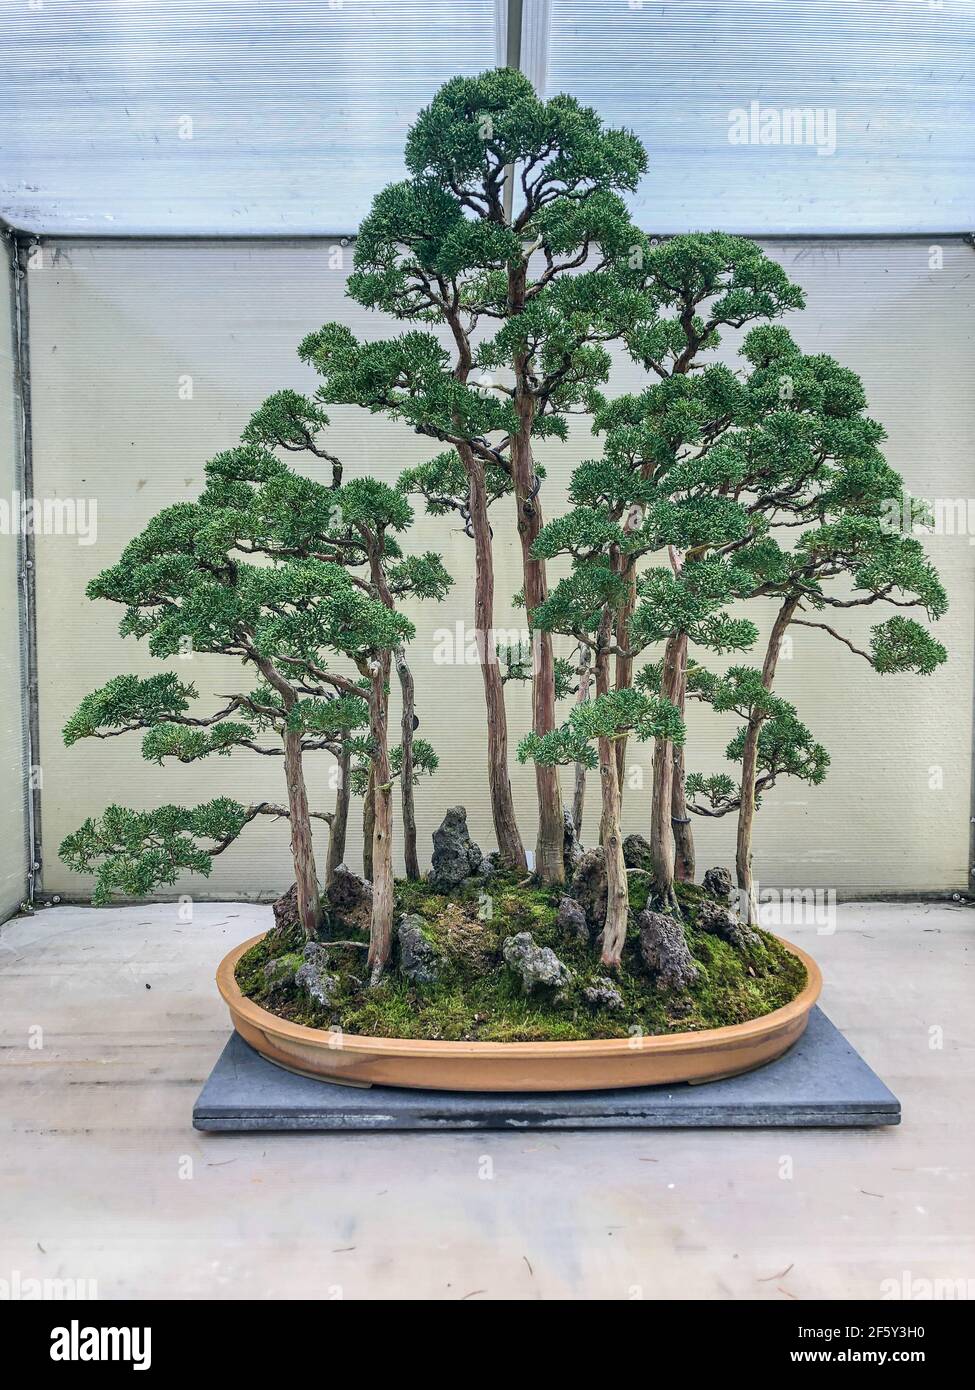 Chinese juniper (Juniperus chinensis) is a species of plant in the cypress family Cupressaceae, native to China, Taiwan, Myanmar, Japan, Korea and the Stock Photo